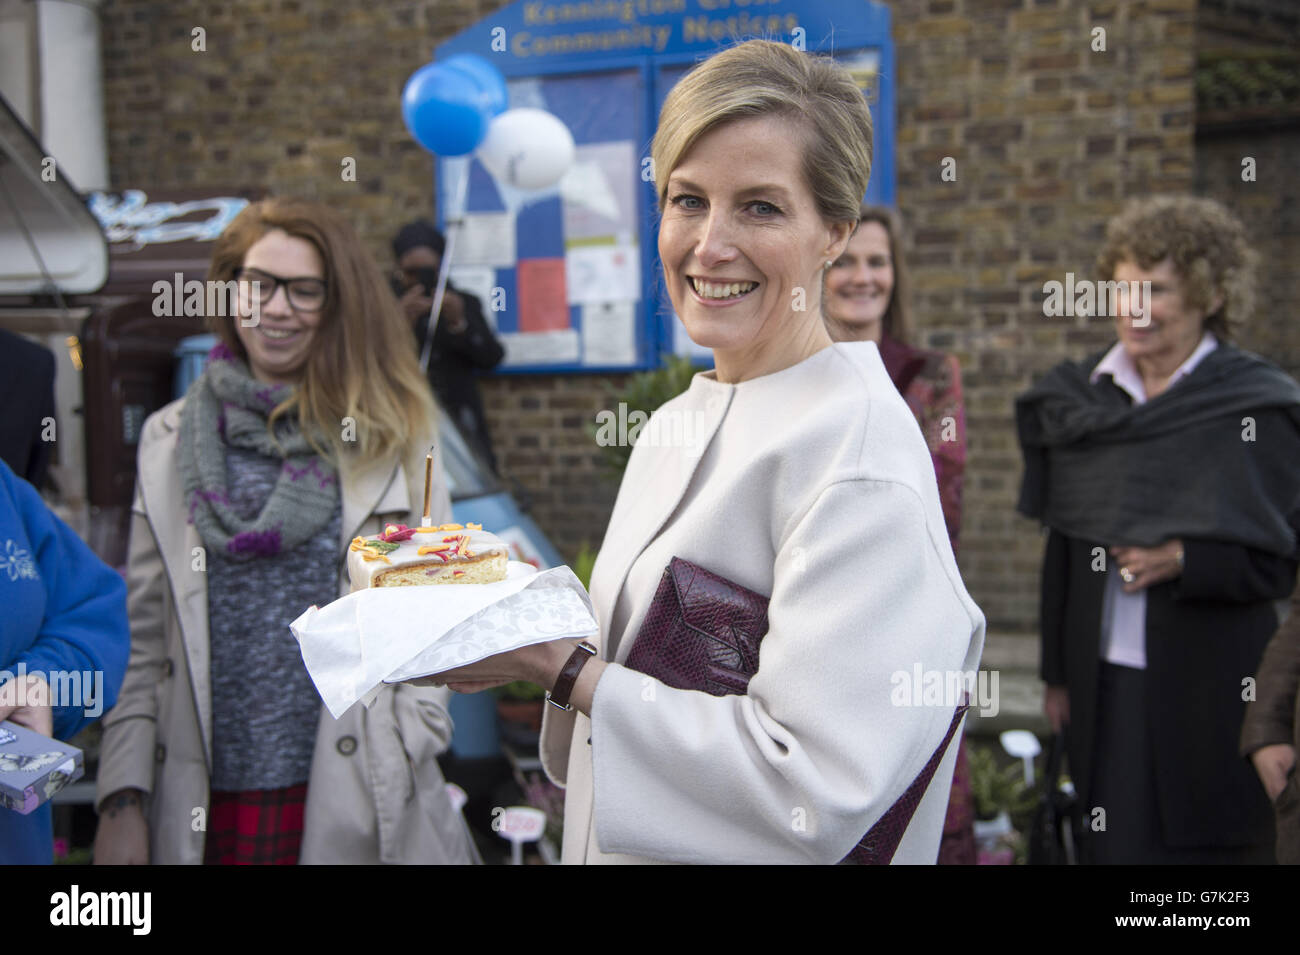 The Countess of Wessex visits the Tomorrow's People Social Enterprises, St Anselm's Church, Kennington, to meet staff and supporters in support of The Queen's Diamond Jubilee Trust and Tomorrow's People, on the Countess' 50th birthday. Stock Photo